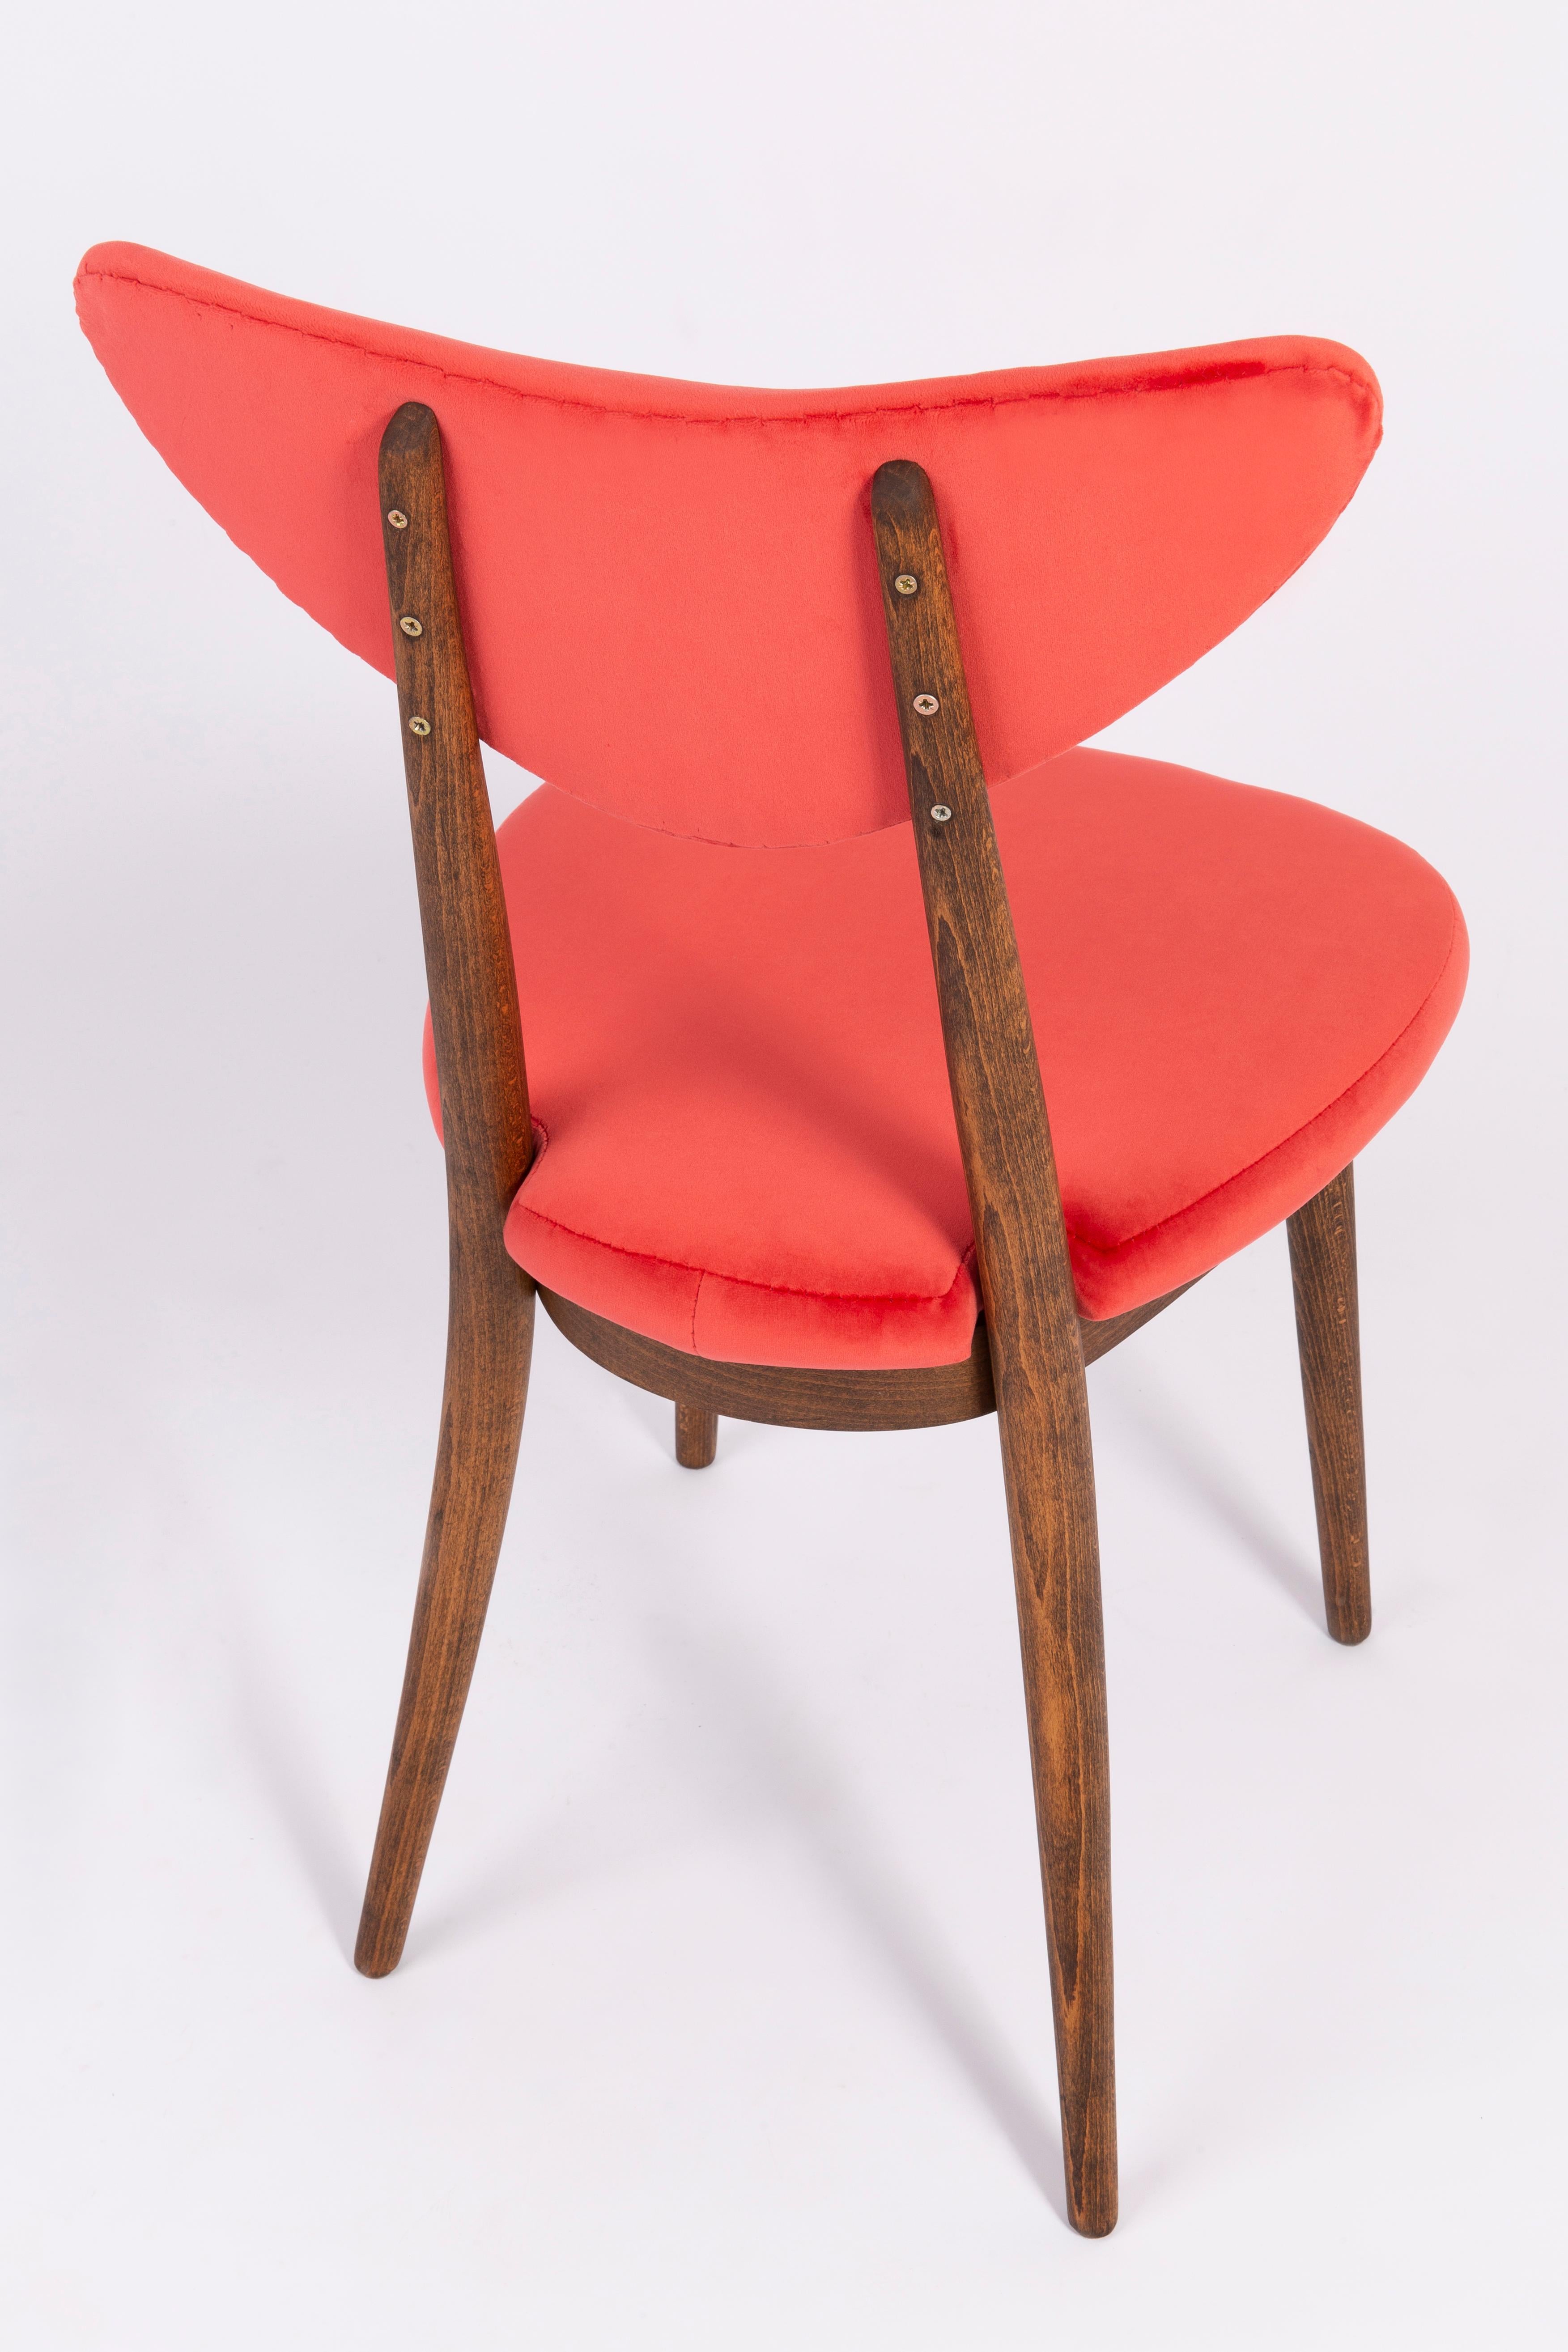 Set of Eight Red Heart Chairs, Poland, 1960s For Sale 2